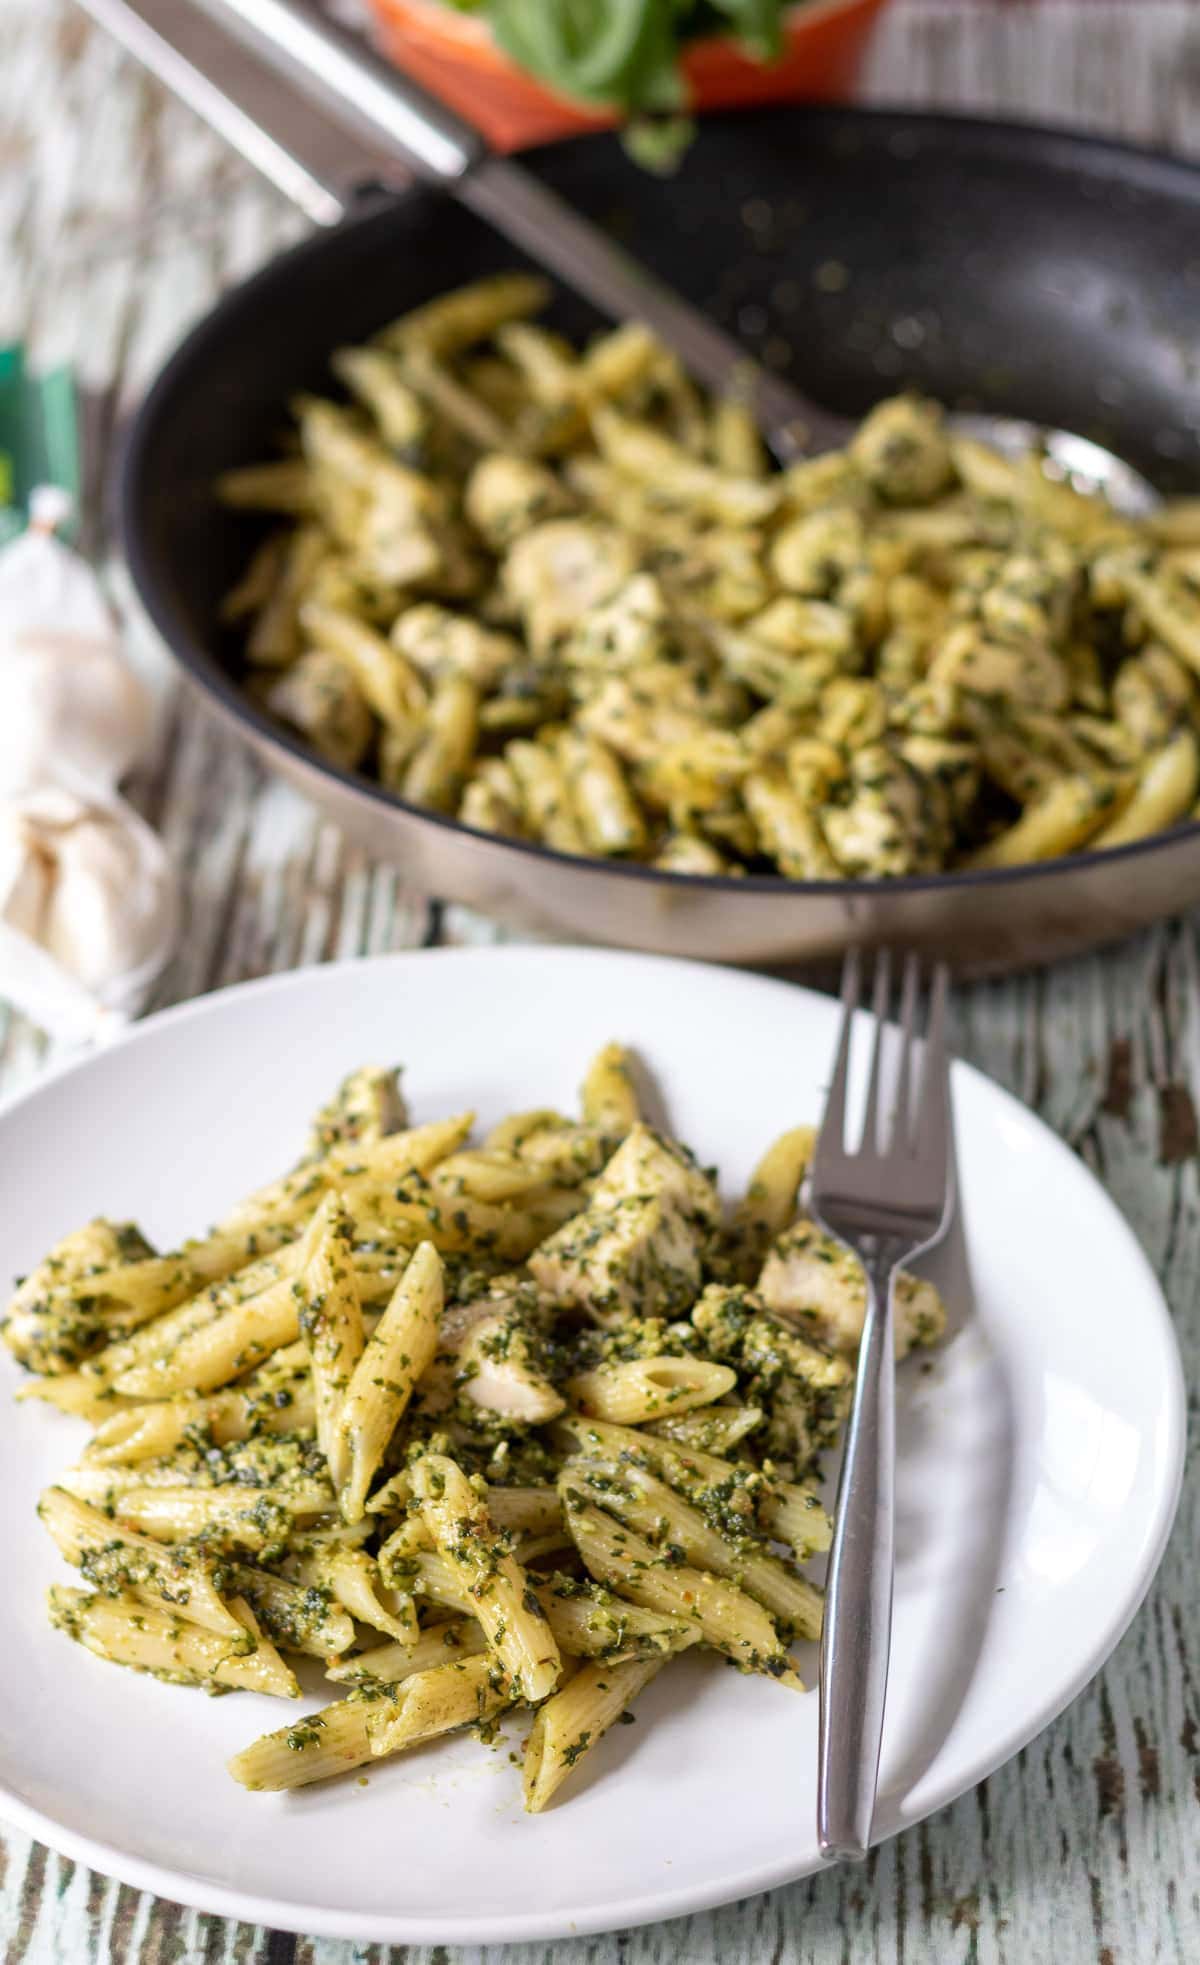 A plate of cooked chicken pesto pasta with a fork to the right hand side. A frying pan of the rest of the cooked dinner in the background.